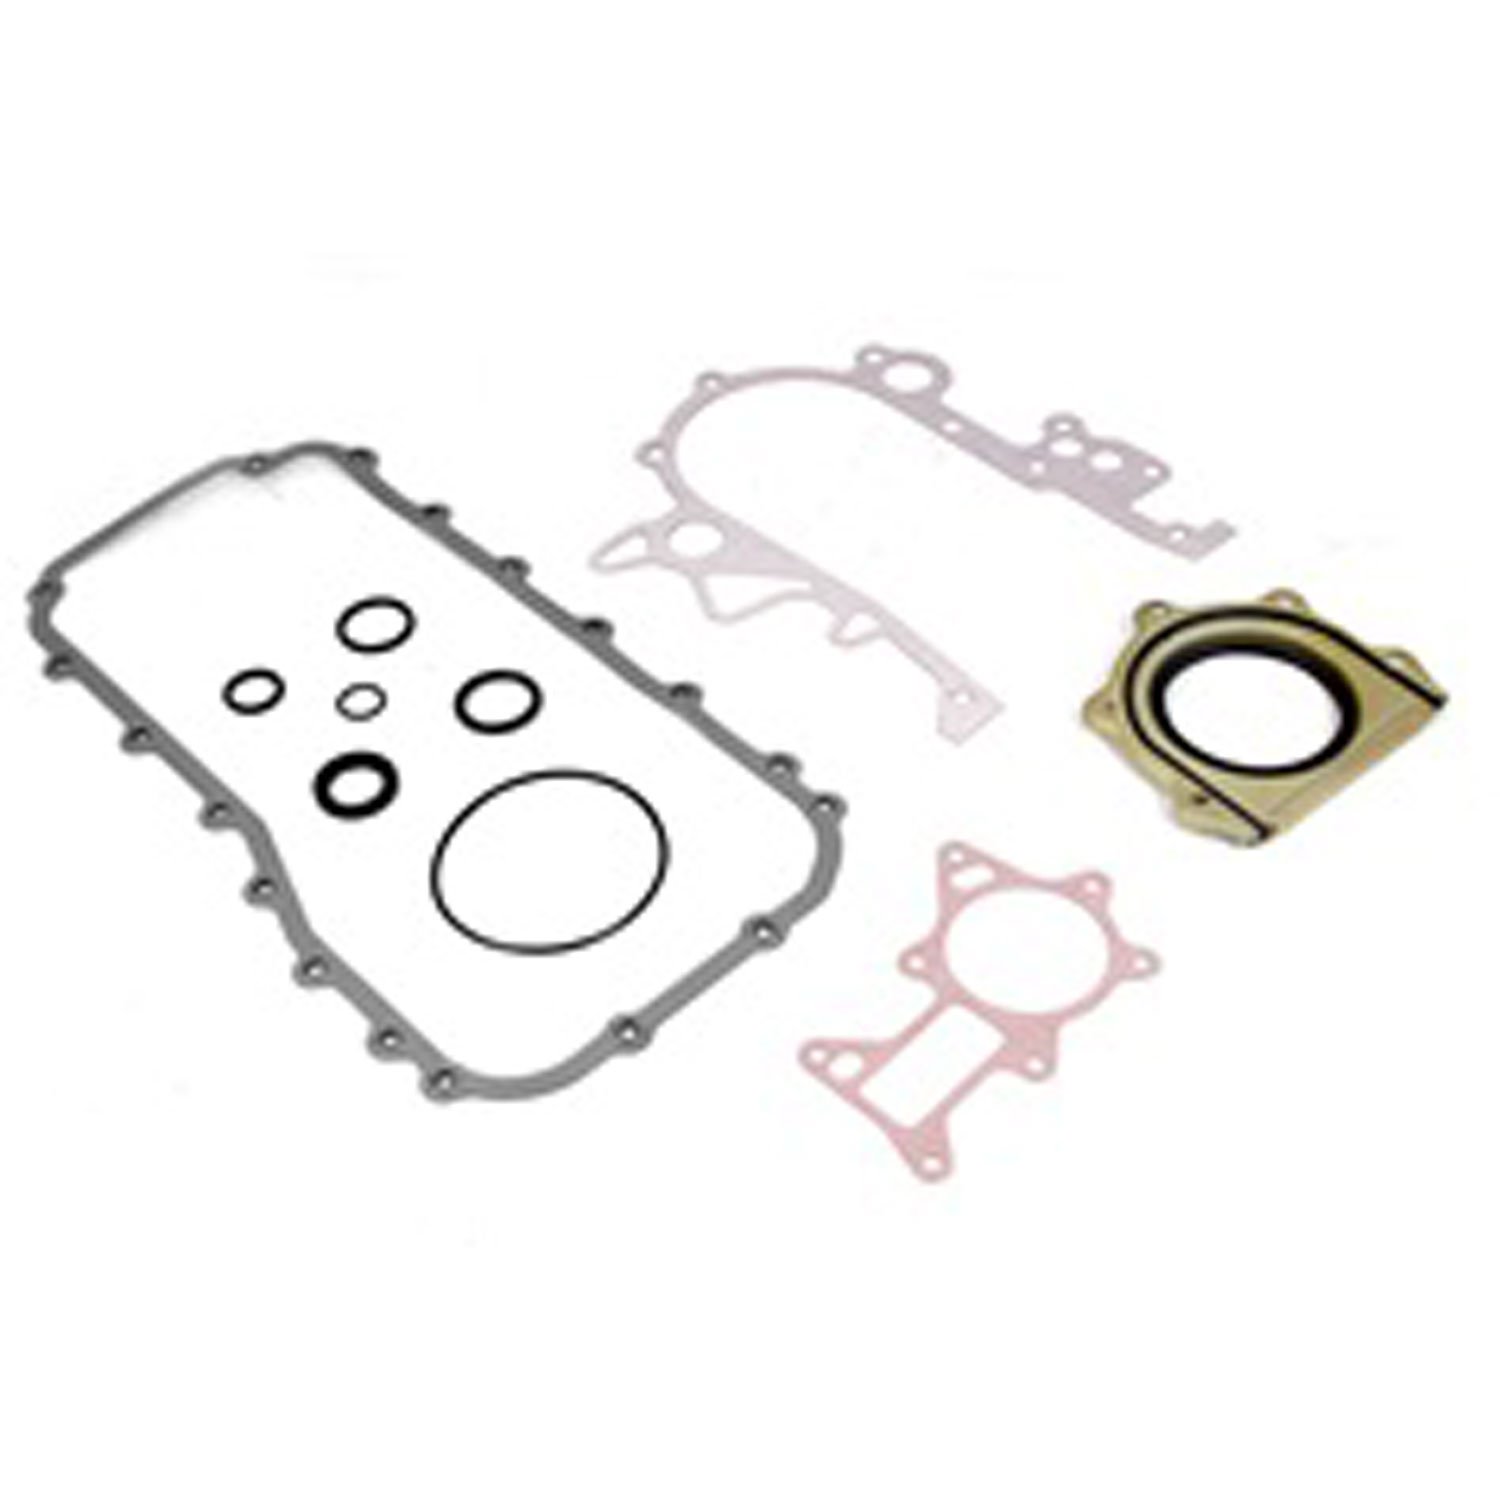 This lower engine gasket set from Omix-ADA fits 07-11 Jeep Wrangler with a 3.8L engine.